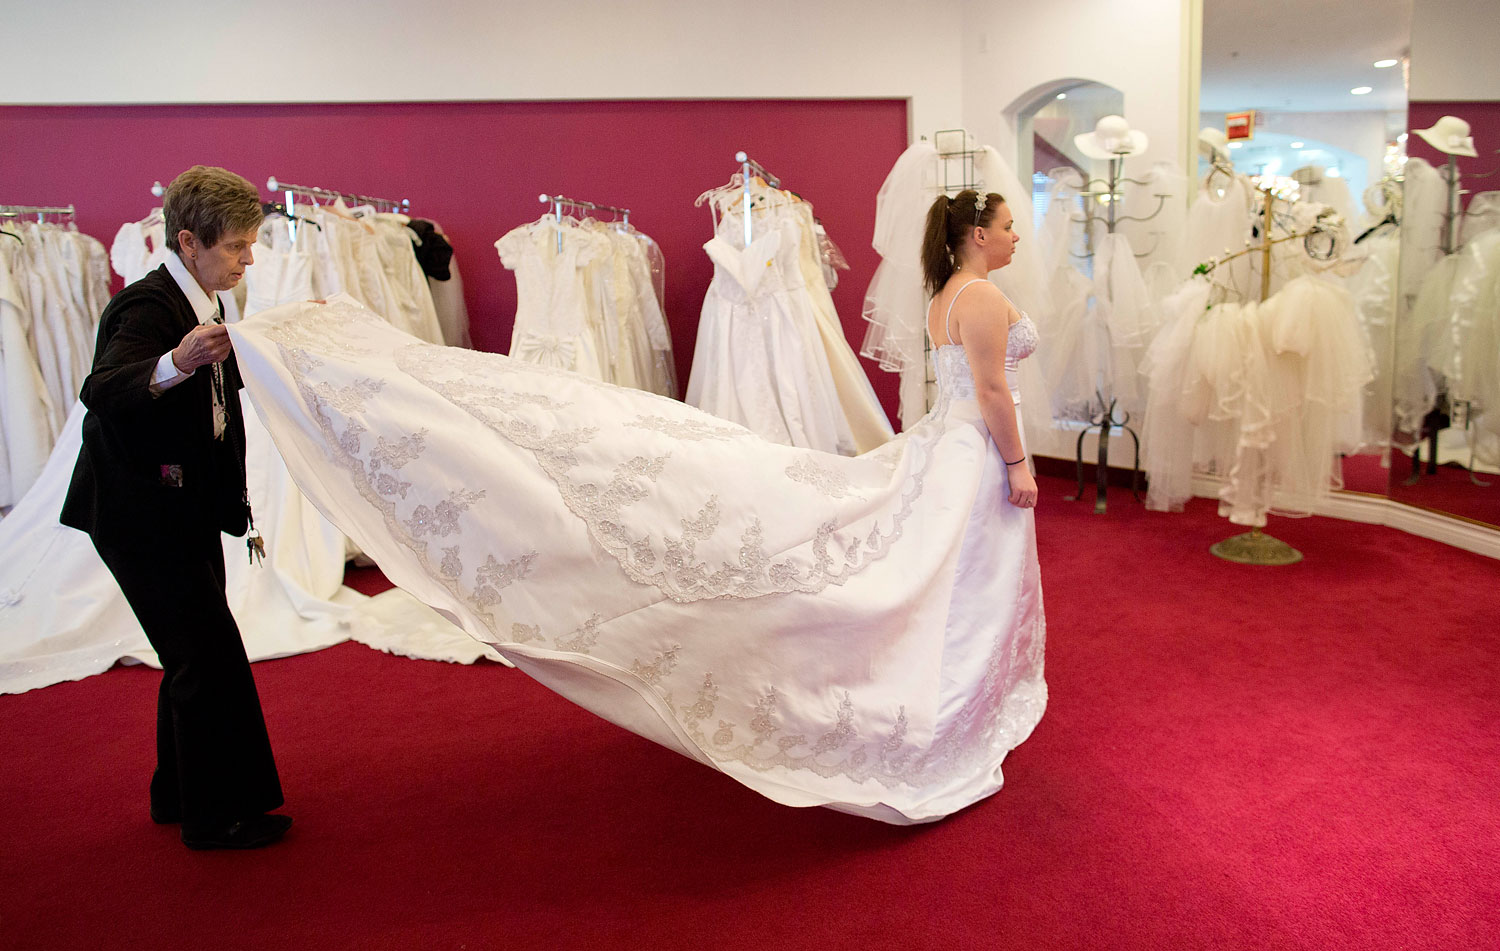 image: Bethany Wood, of Jackson, Mich., tries on a wedding gown before being married in Las Vegas.